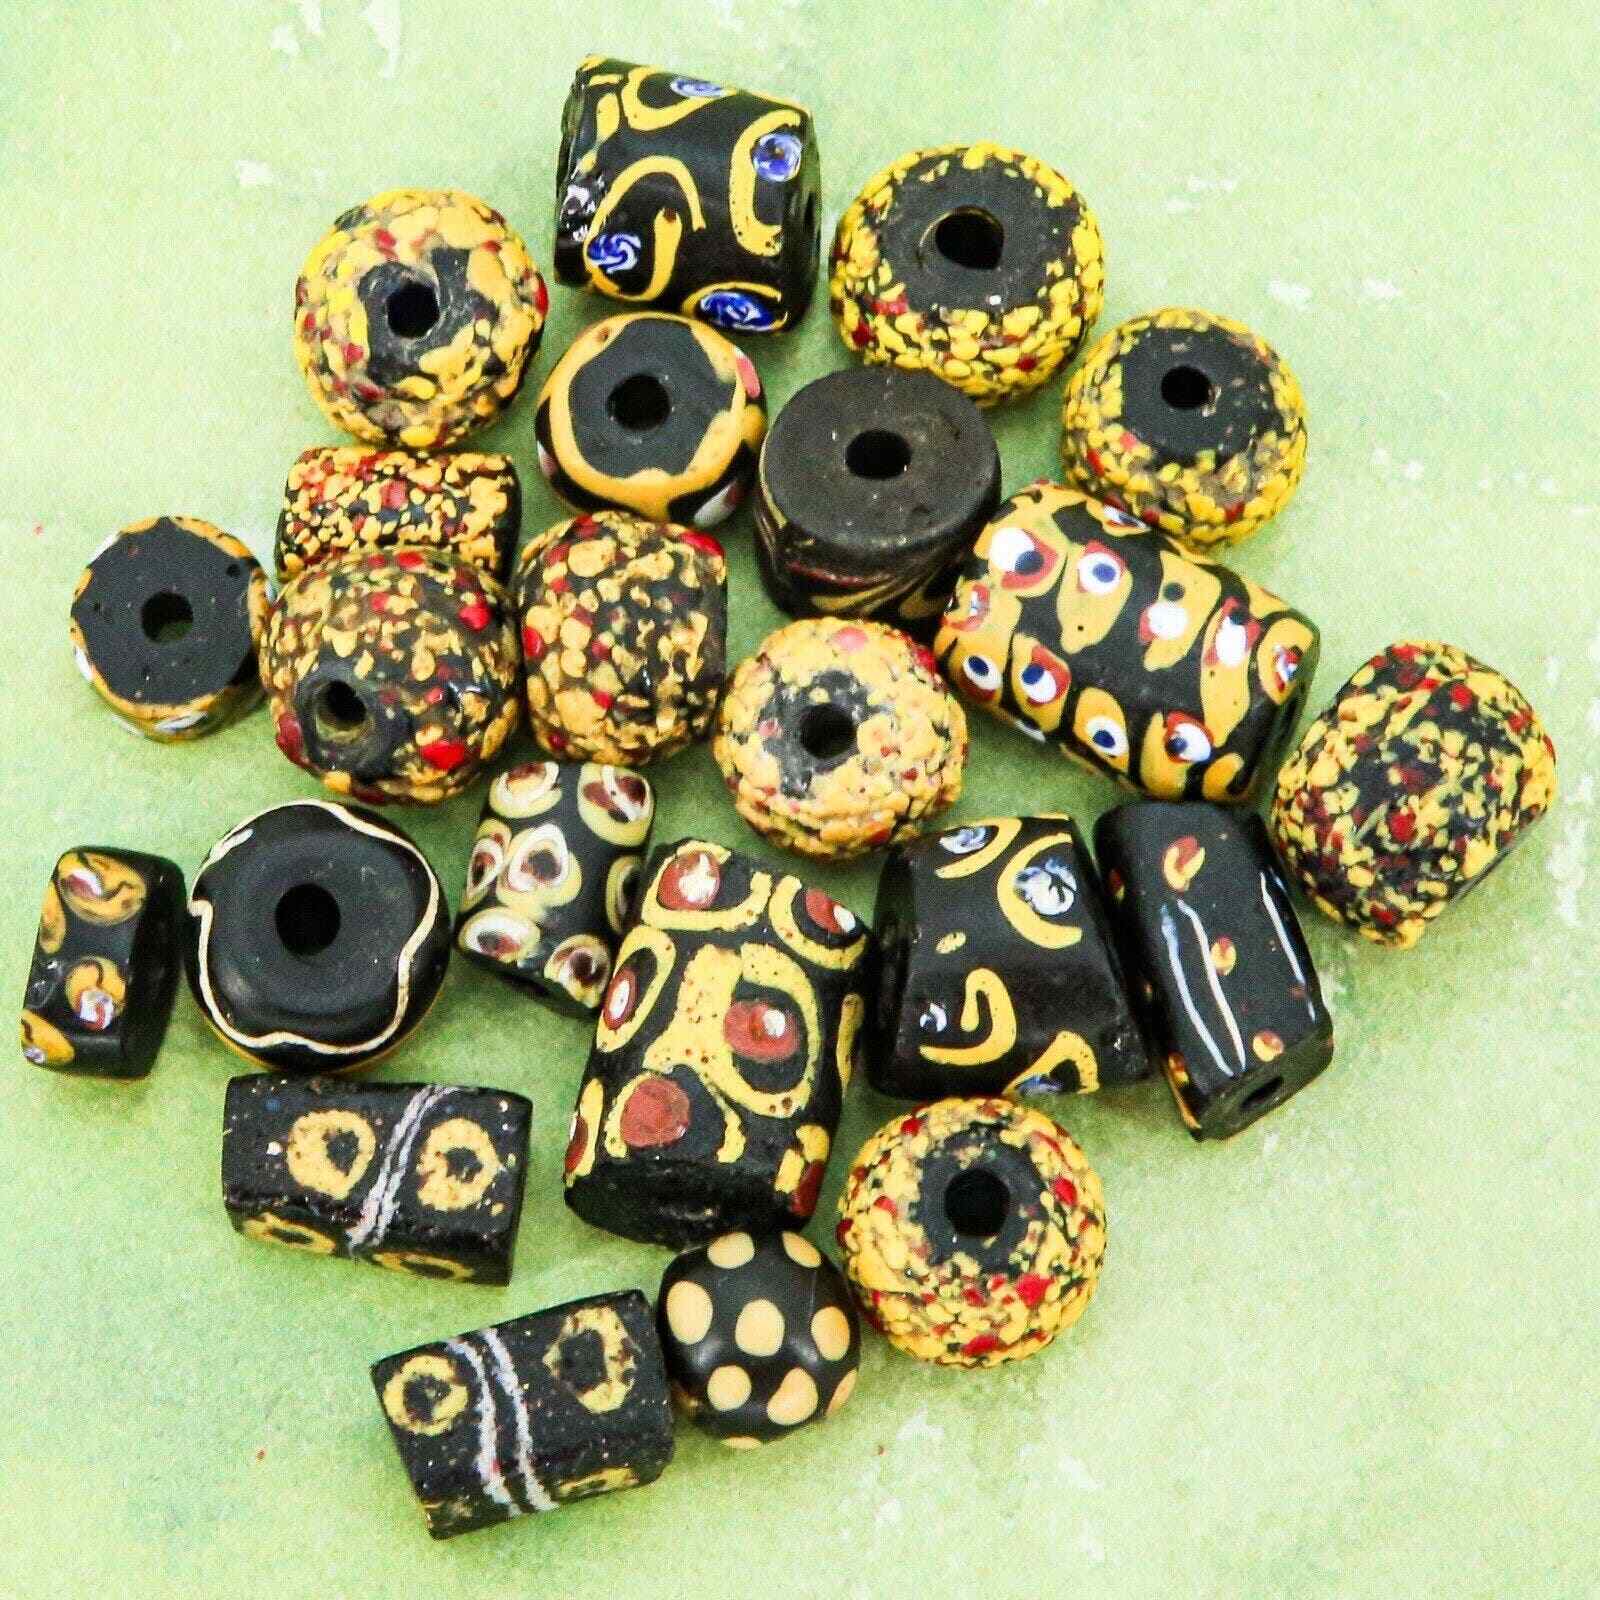 Lot 23 Antique Venetian African Trade Beads Black Yellow Feathers Evil Eye Crumb